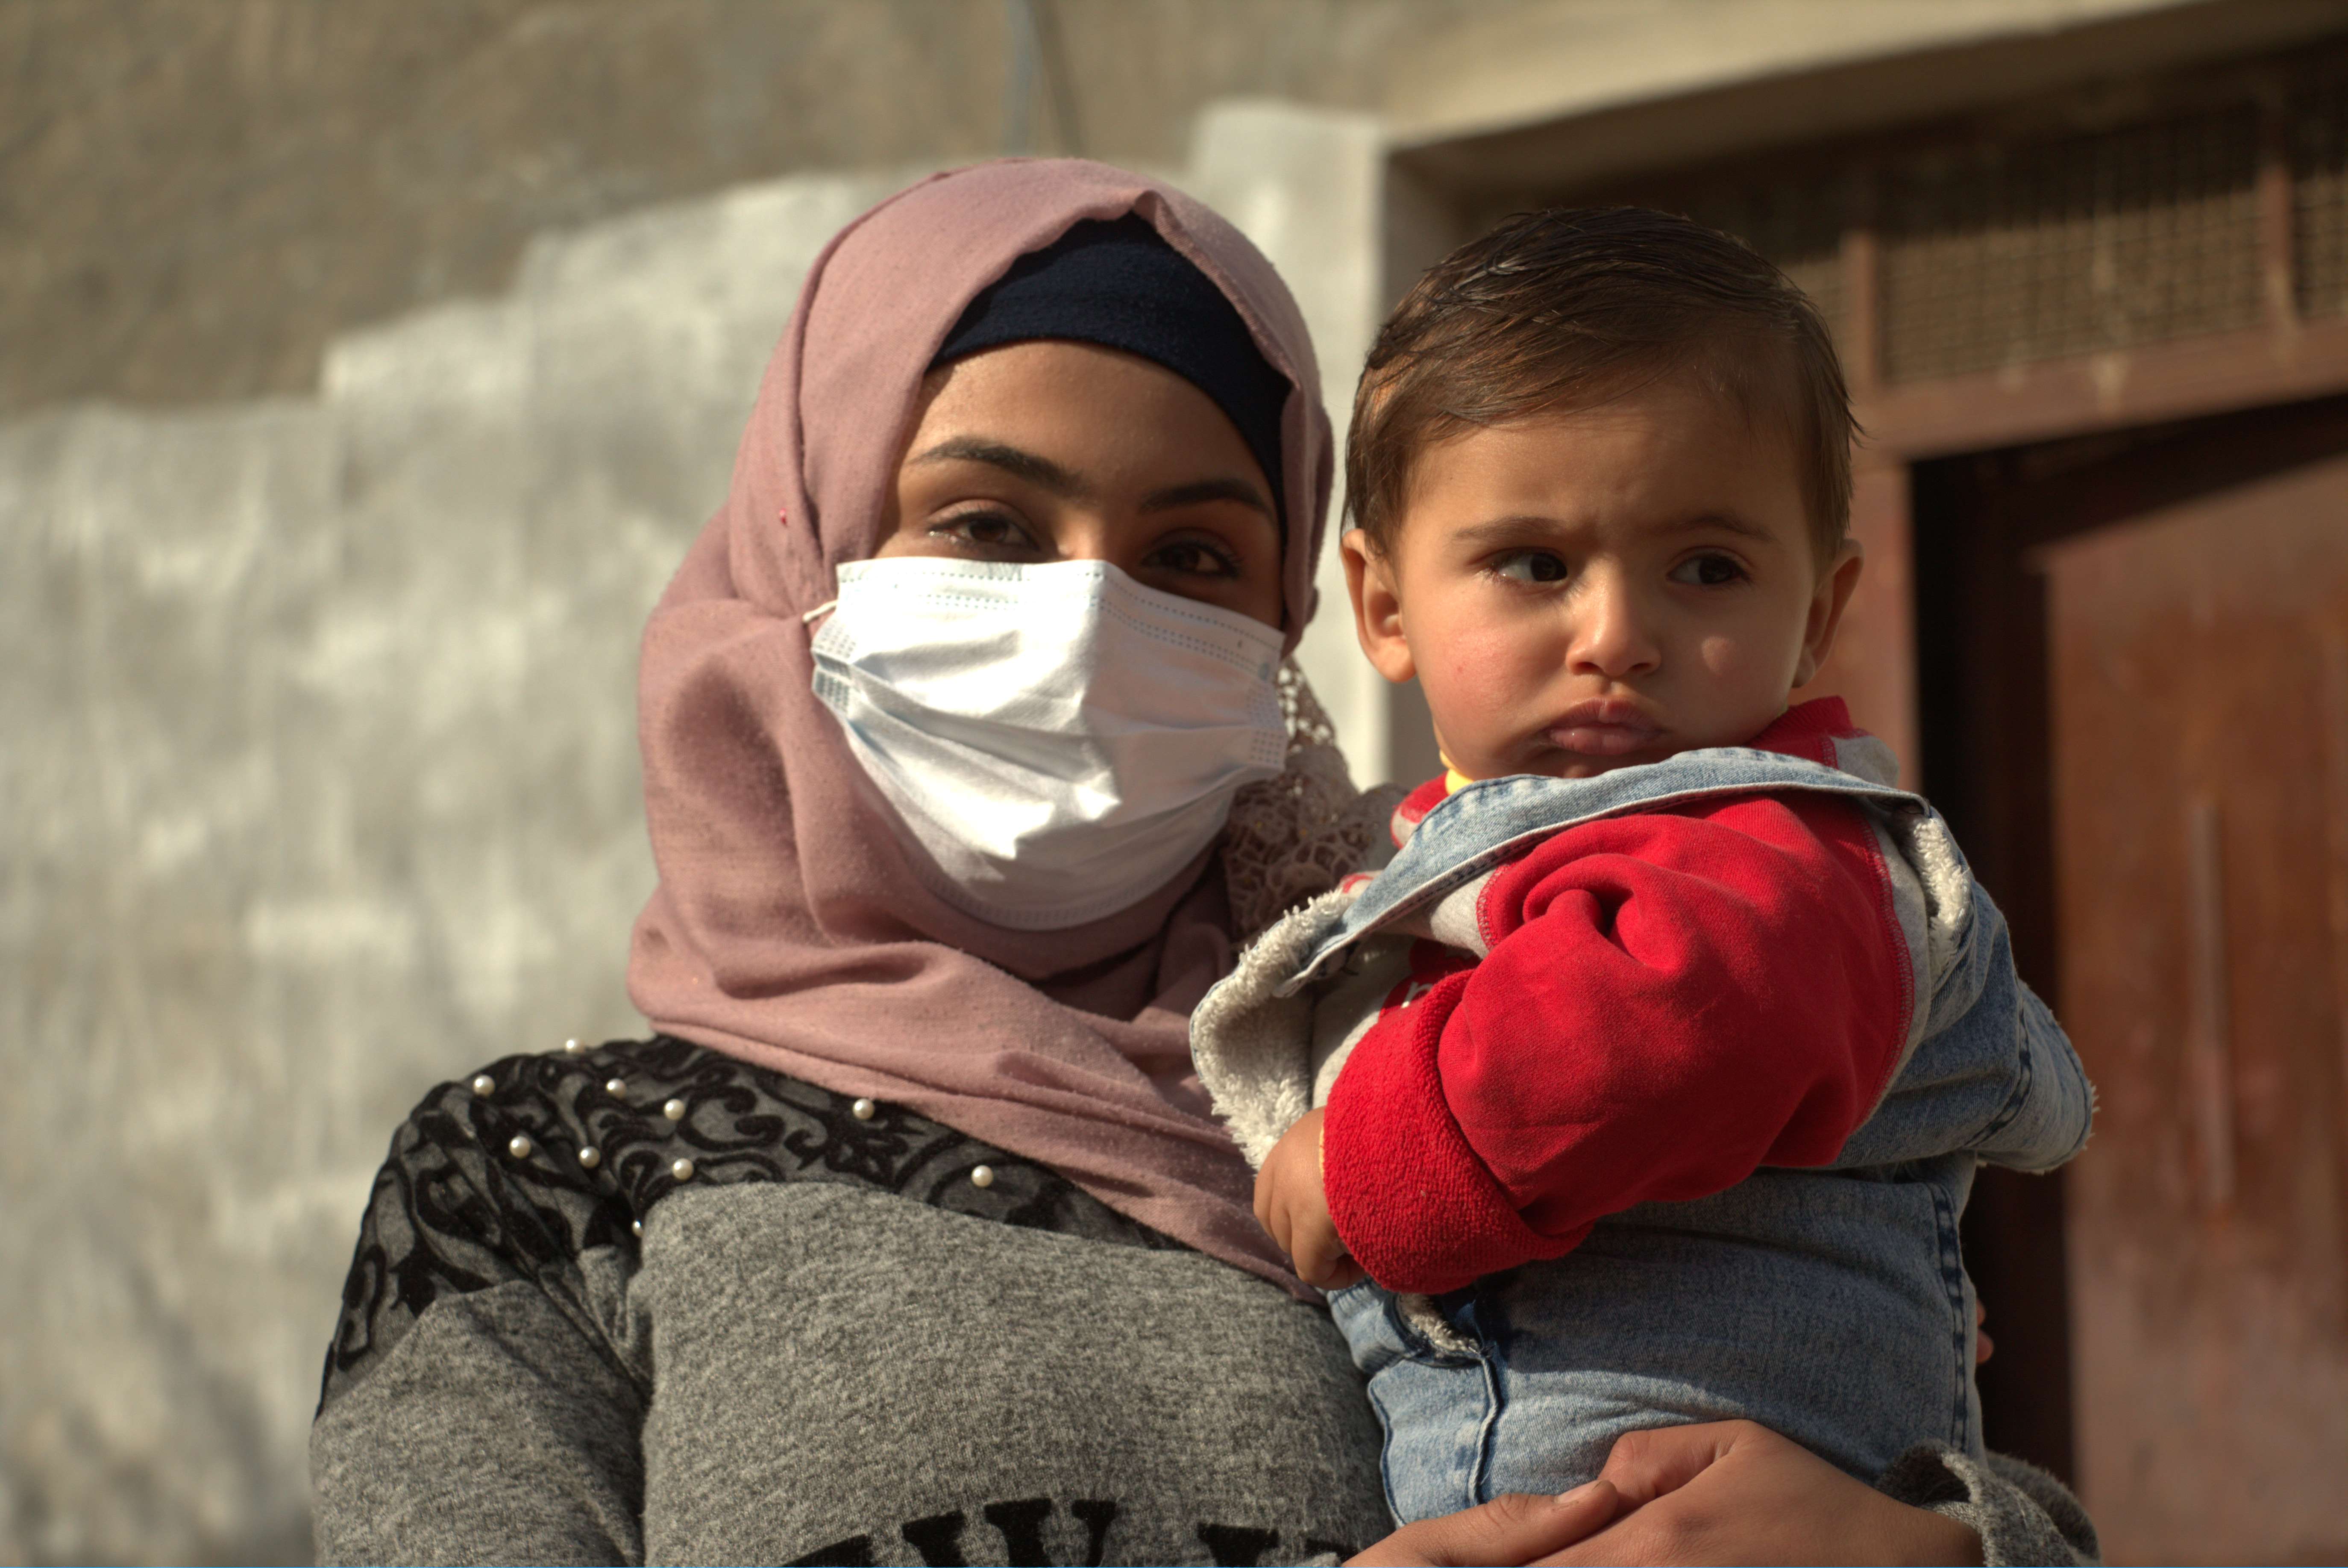 Syrian refugee girl in Jordan wears a facemask against COVID-19 as she holds her young child